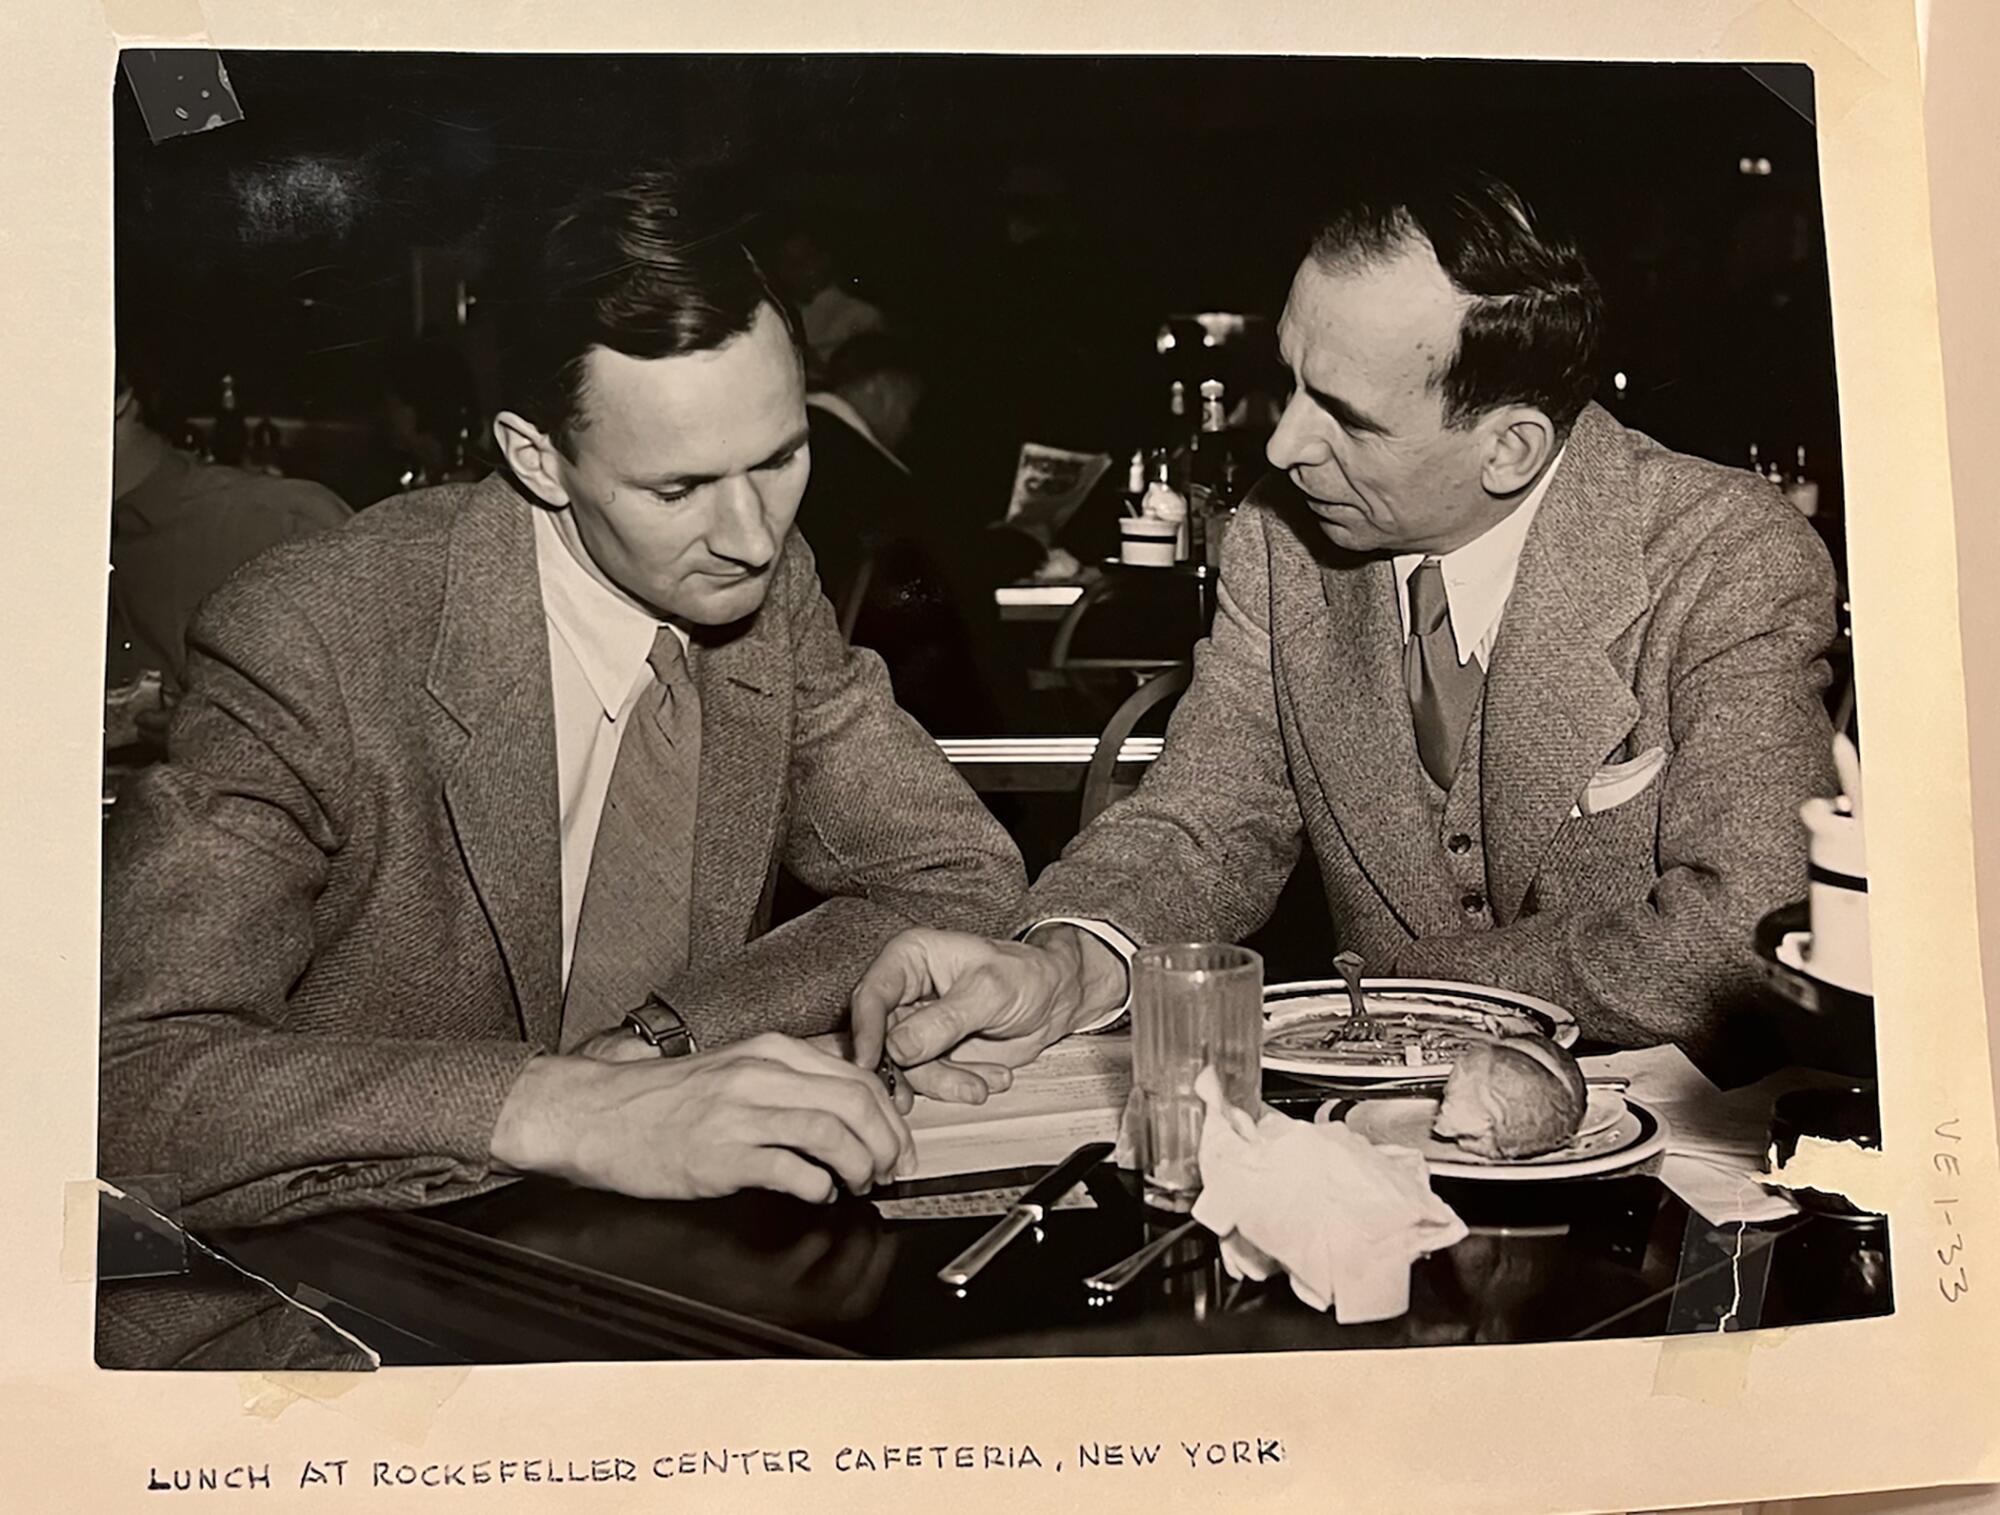     Two men in suits sitting at a table talking.